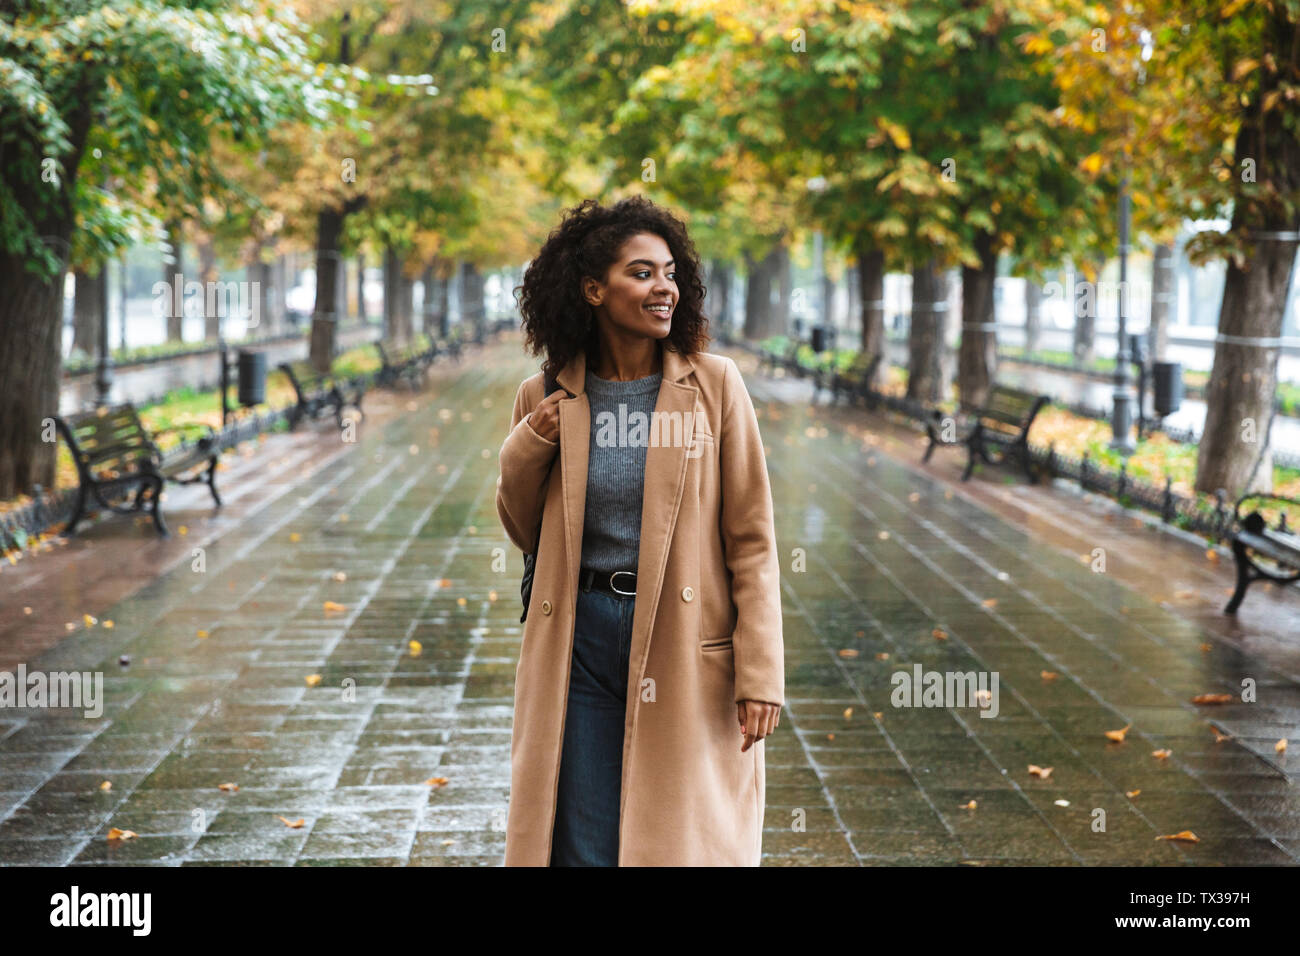 Beautiful Young African Woman Wearing Coat Walking Outdoors At The Park